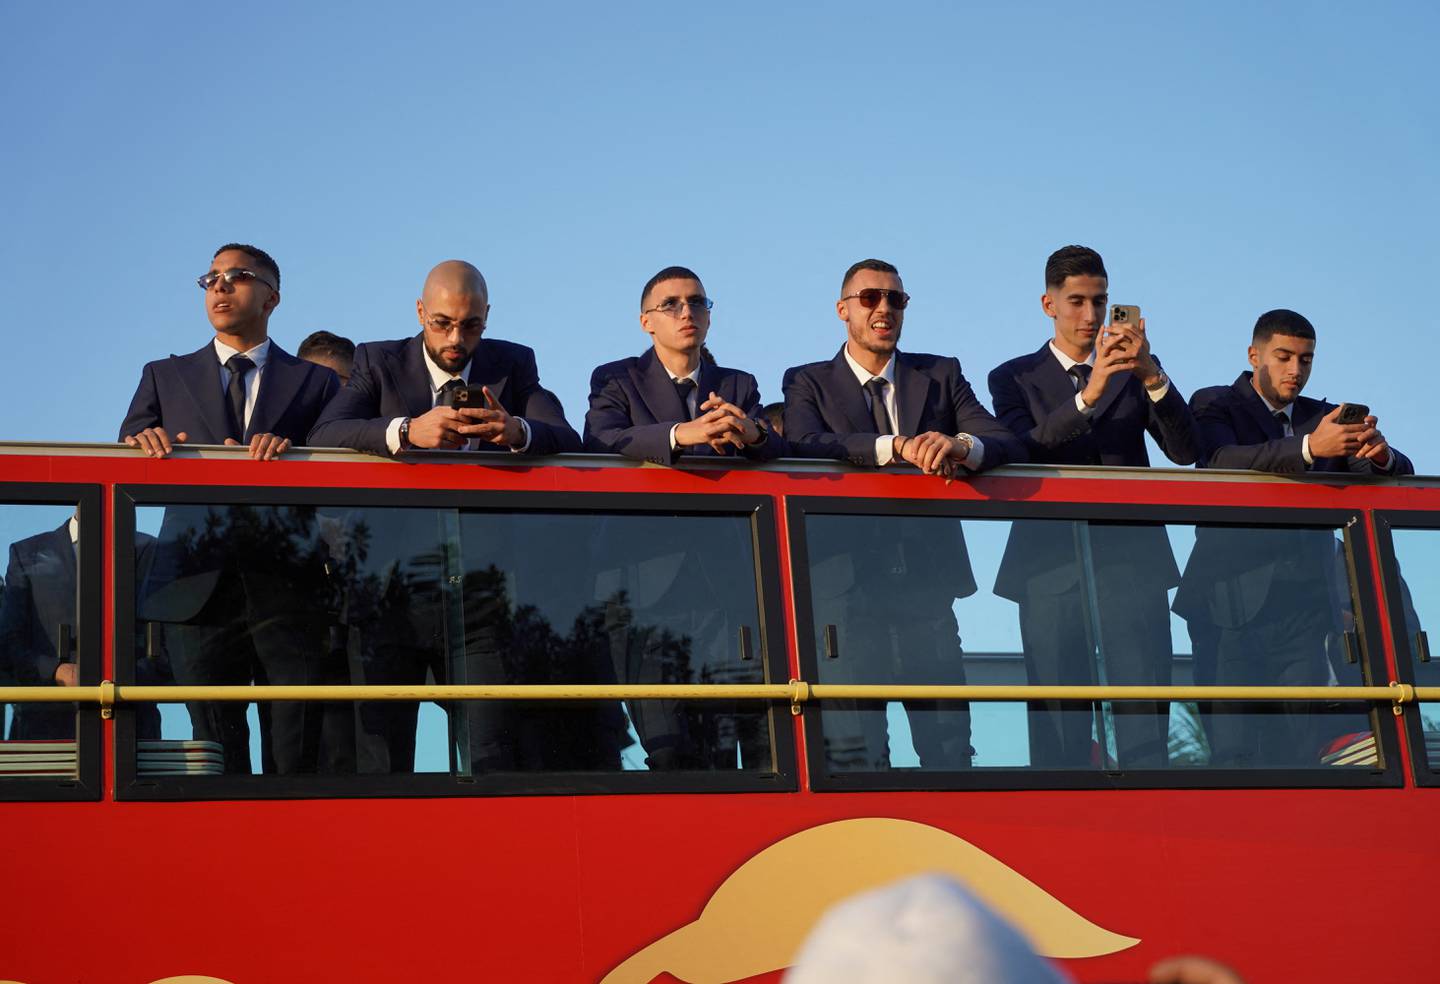 Soccer Football - FIFA World Cup Qatar 2022 - Morocco return after the World Cup - Rabat, Morocco - December 20, 2022 Morocco players are pictured on a bus  REUTERS / Abdelhak Balhaki